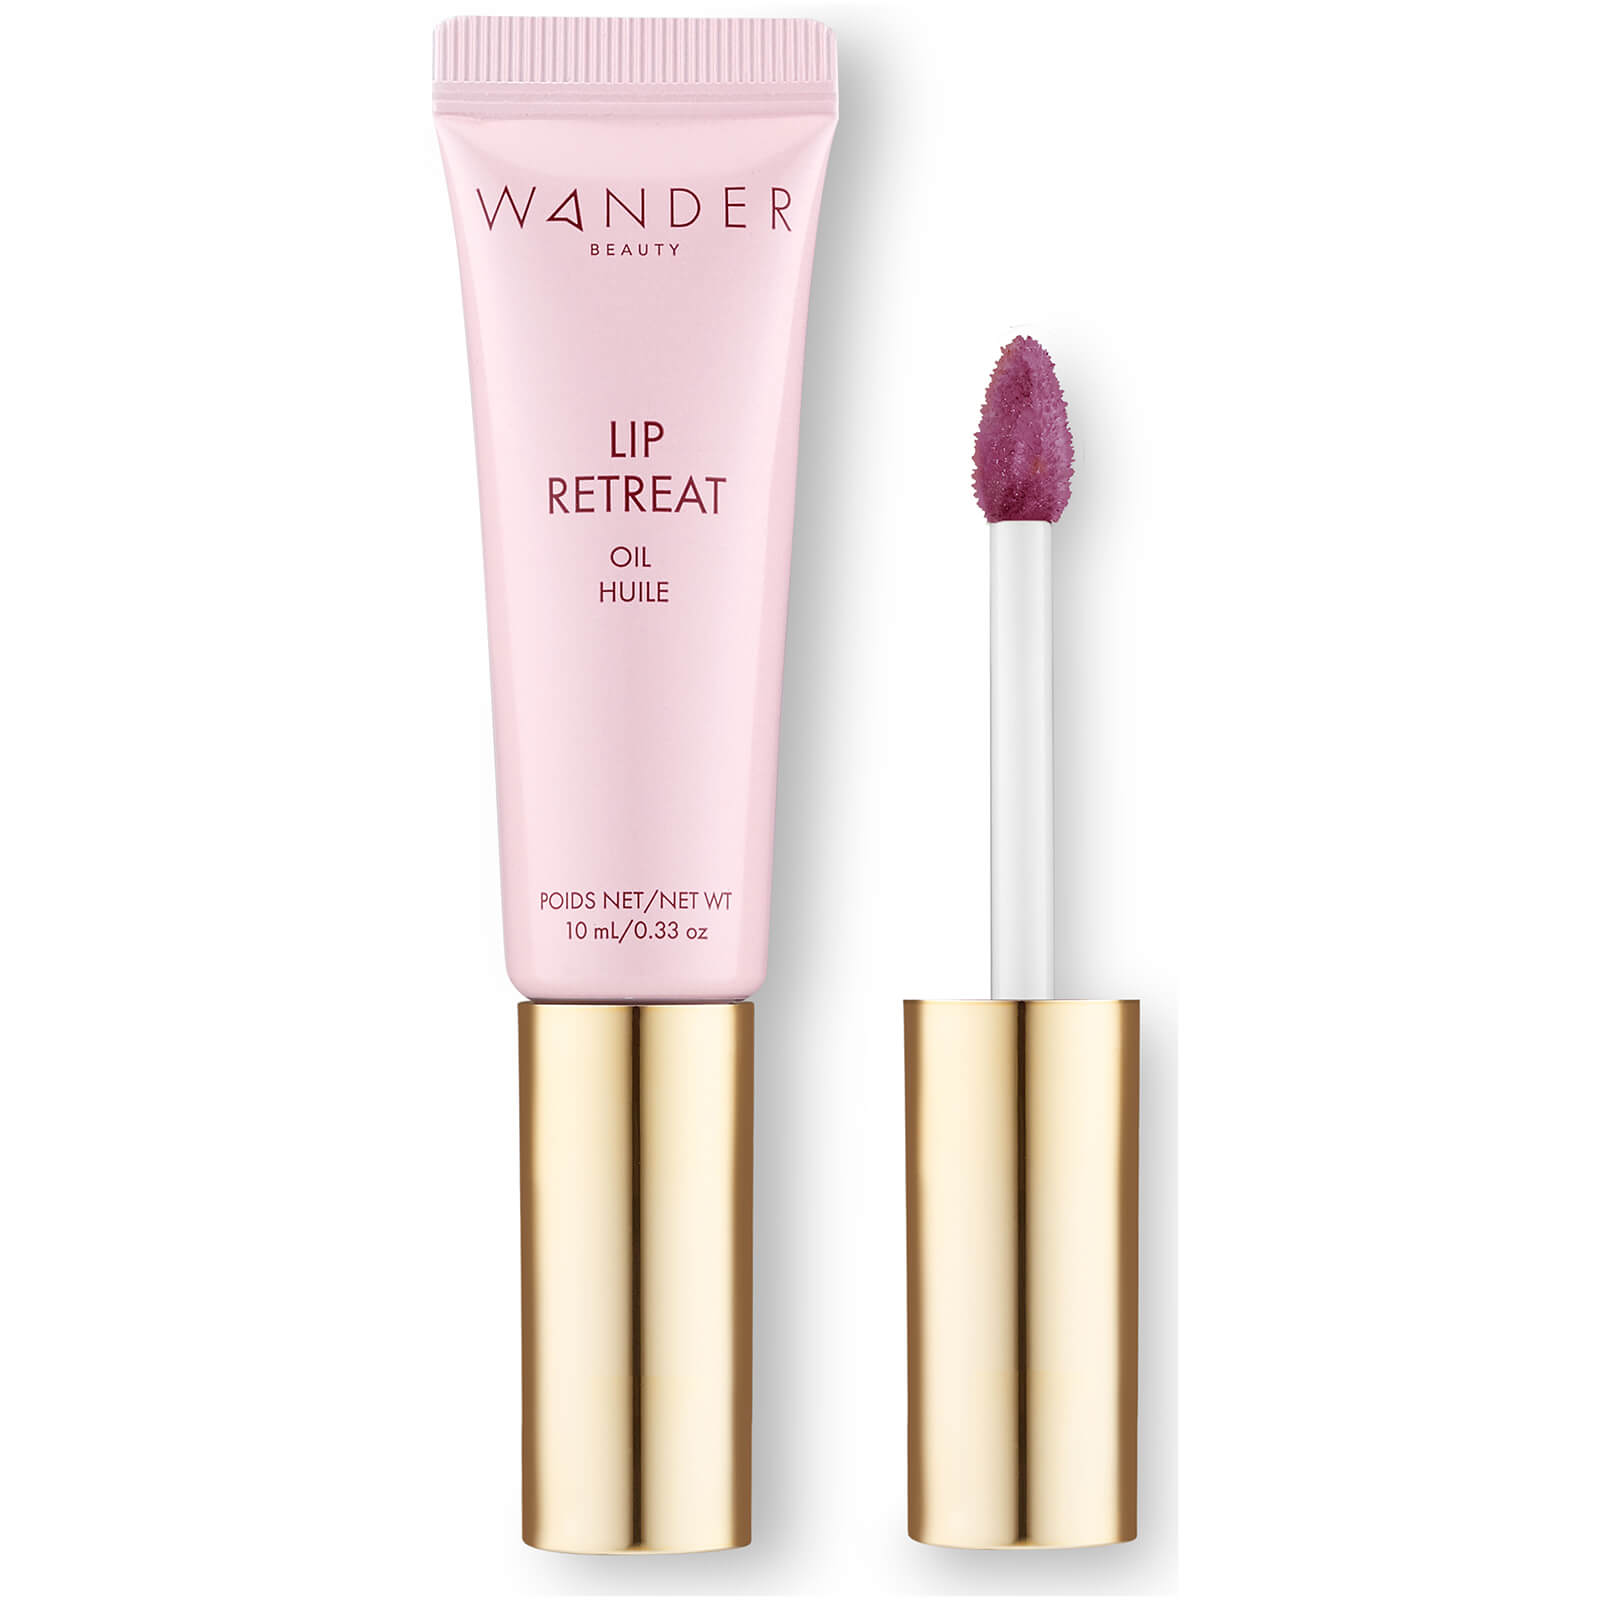 Image of Wander Beauty Lip Retreat Oil 10ml (Various Shades) - Excursion